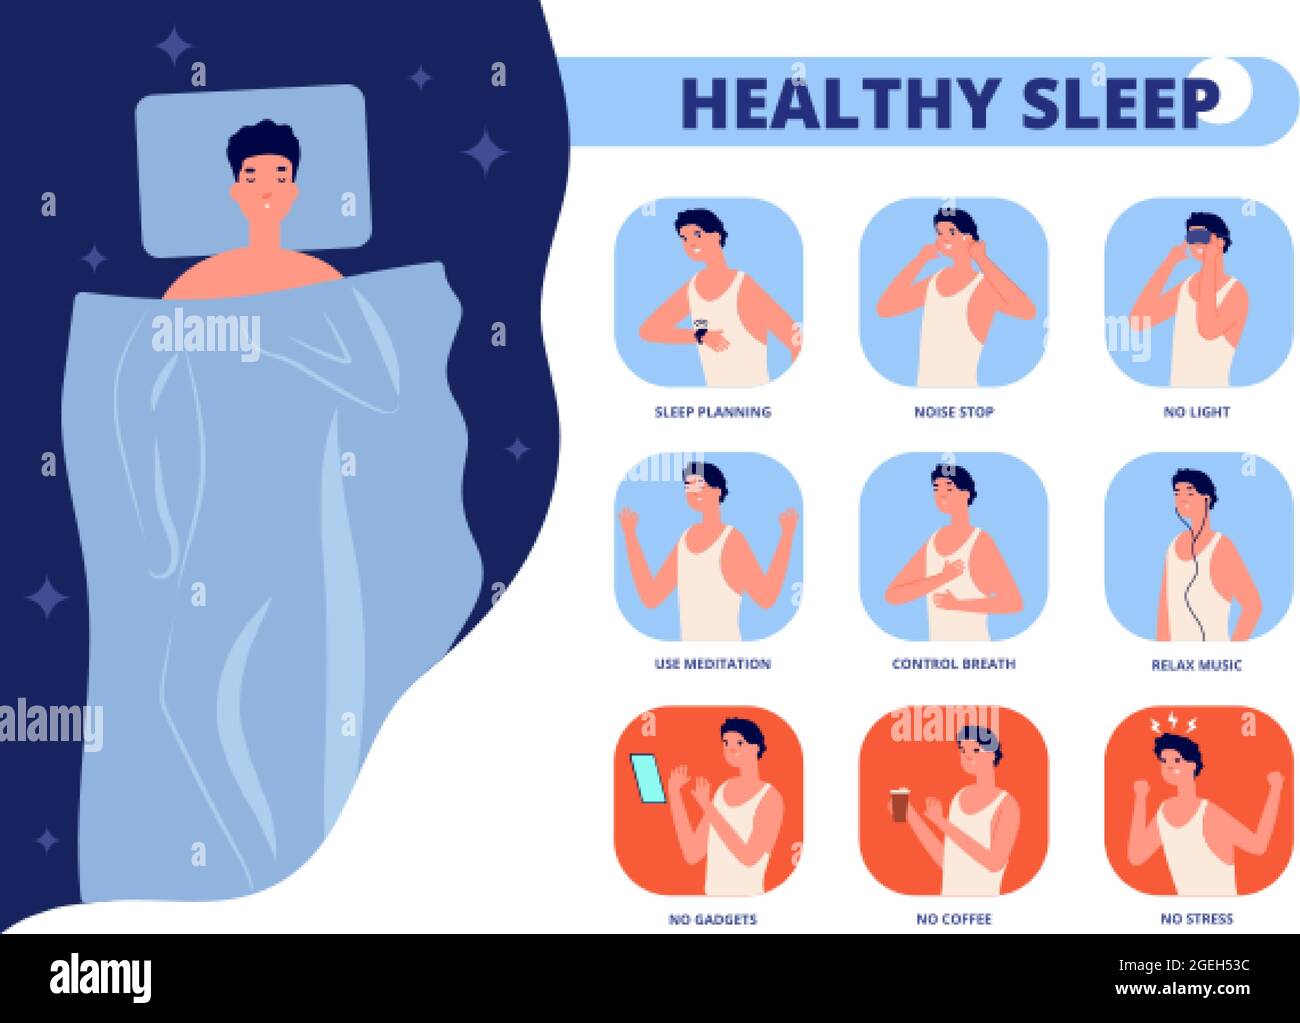 Healthy Sleep Tips For Well Sleeping Infographic Of Good Night Relaxation Bedtime Rules Or